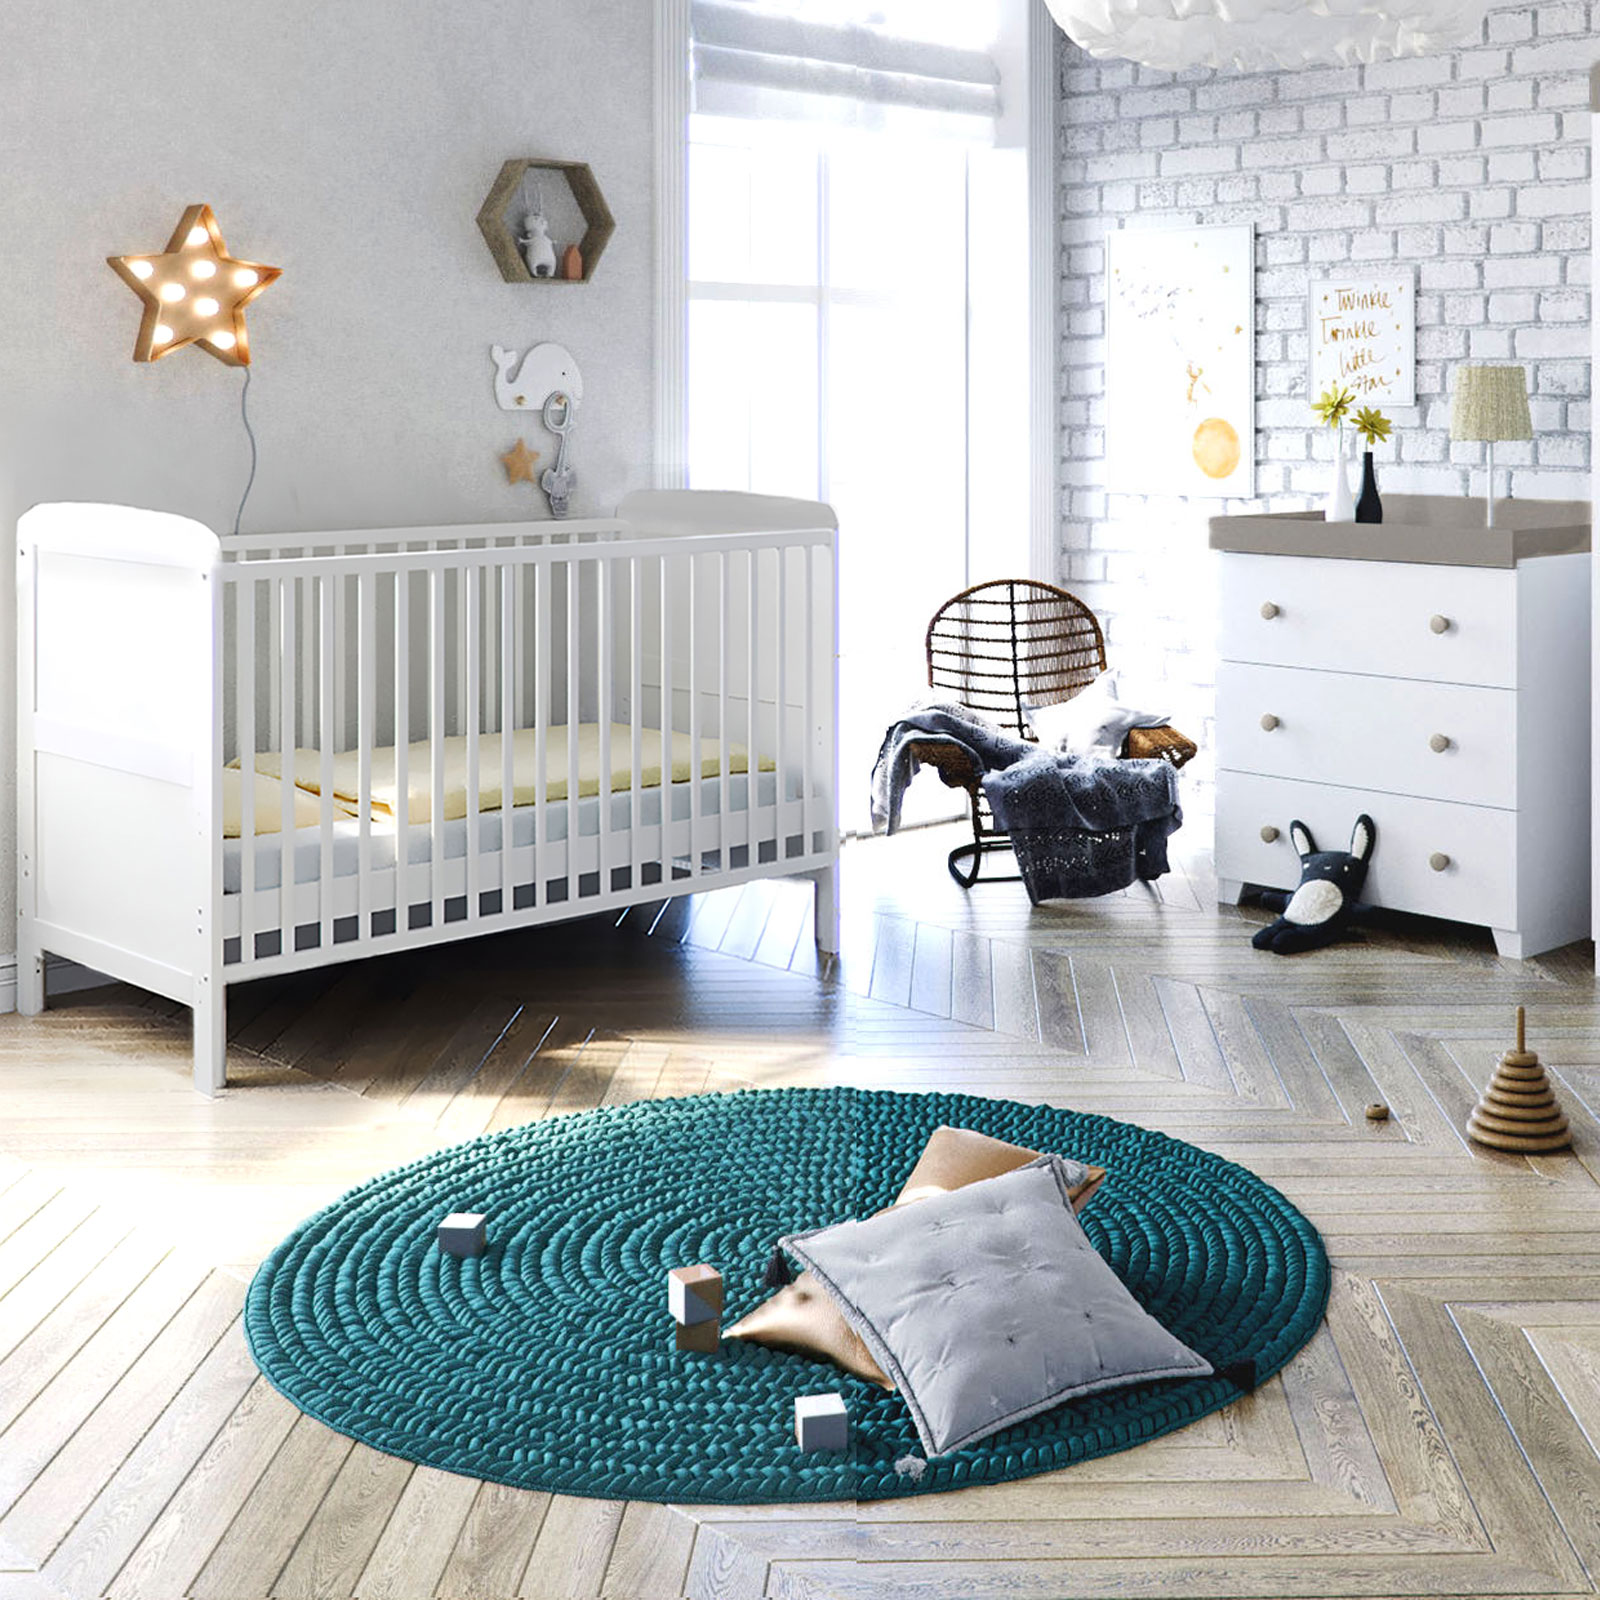 Puggle Henbury Cot Bed 4 Piece Nursery Furniture Set With Maxi Air Cool Mattress - White & Grey